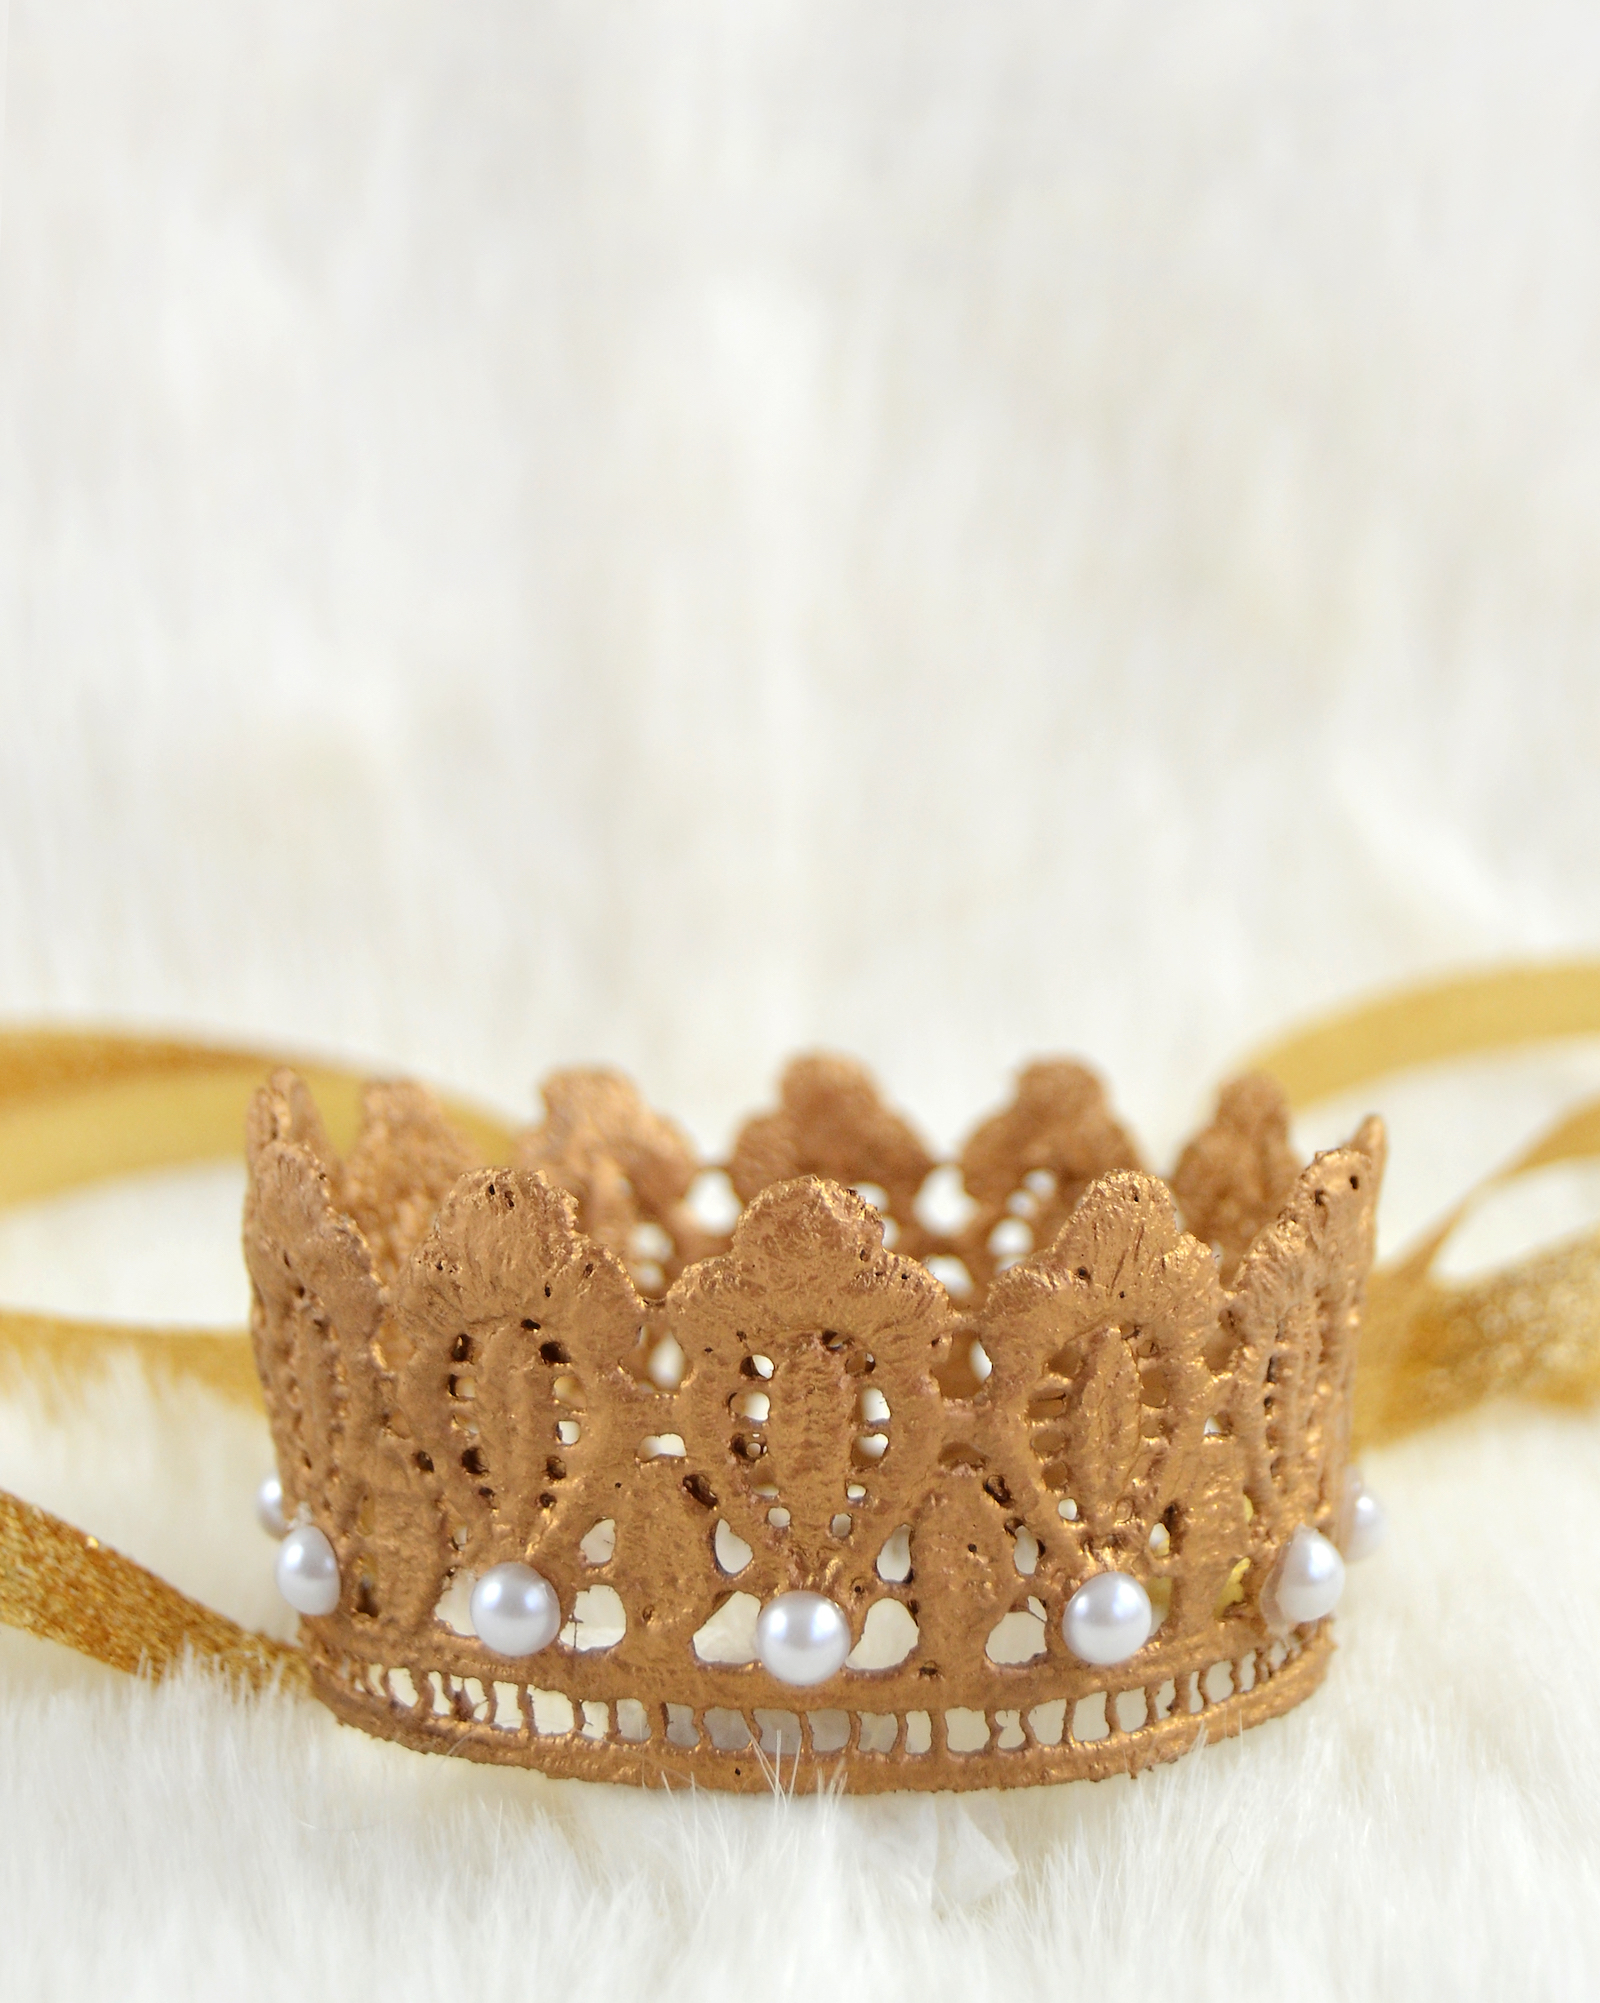 How to make a lace crown